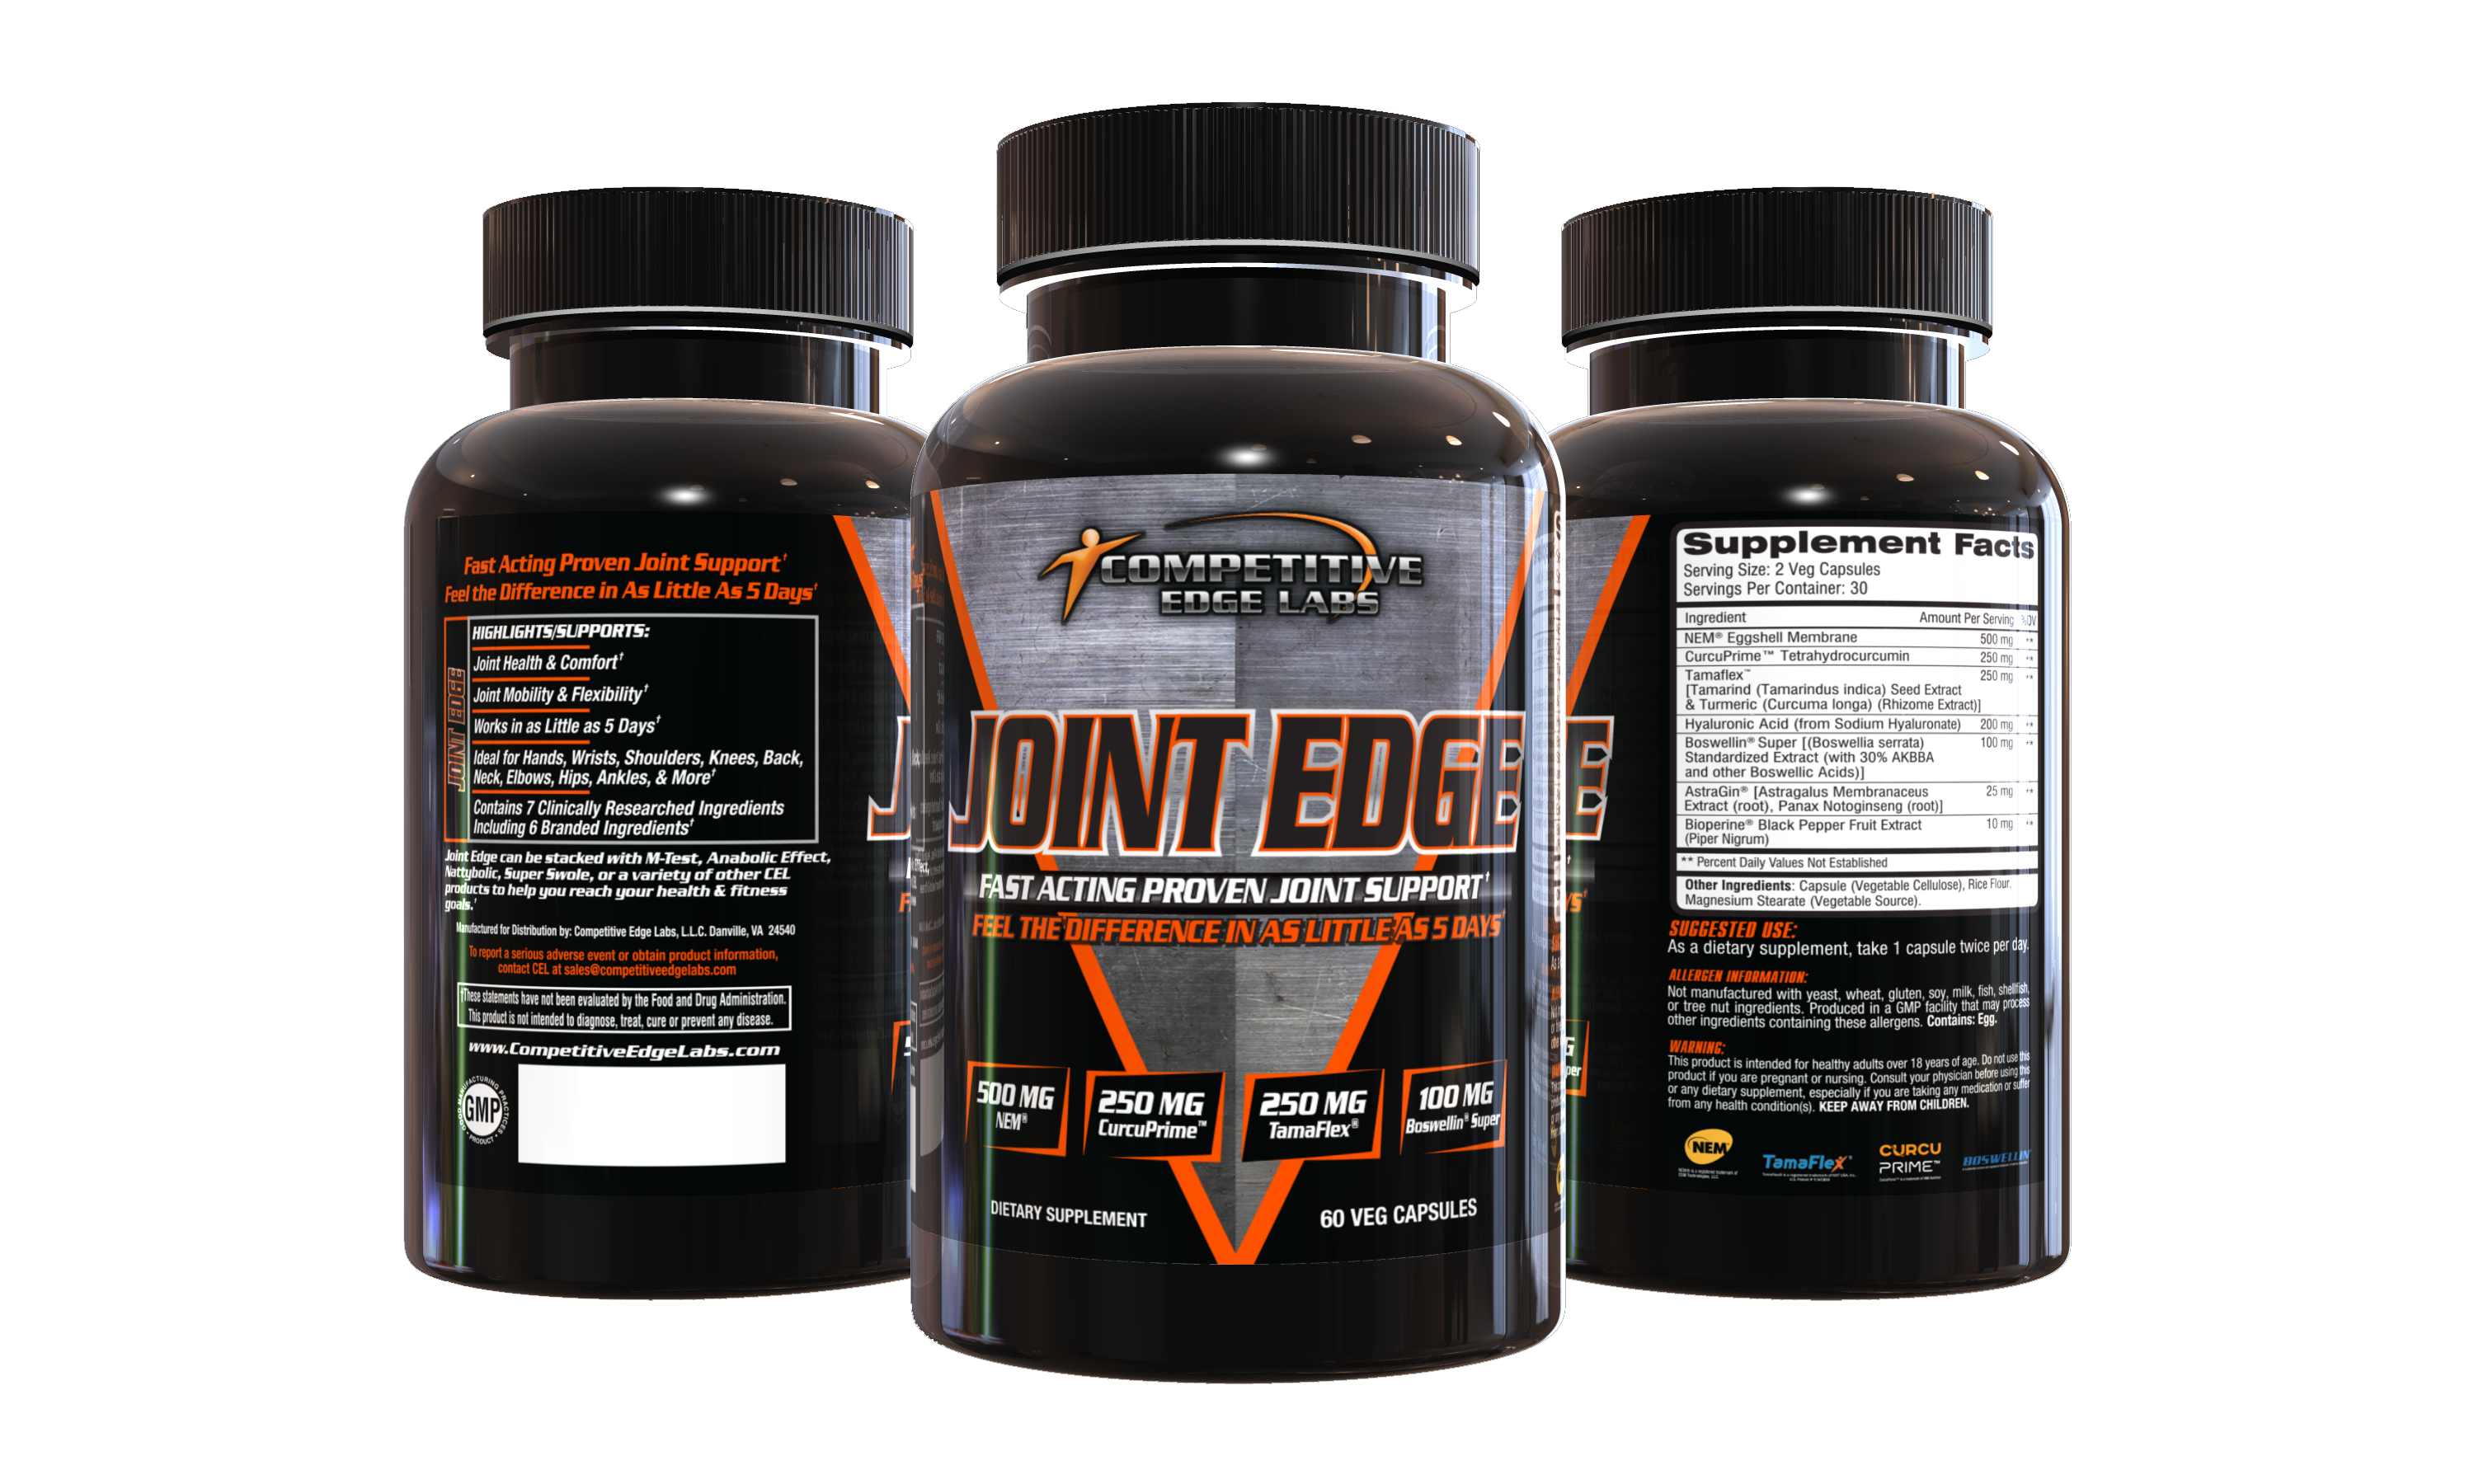 Competitive Edge Joint Edge 3 side